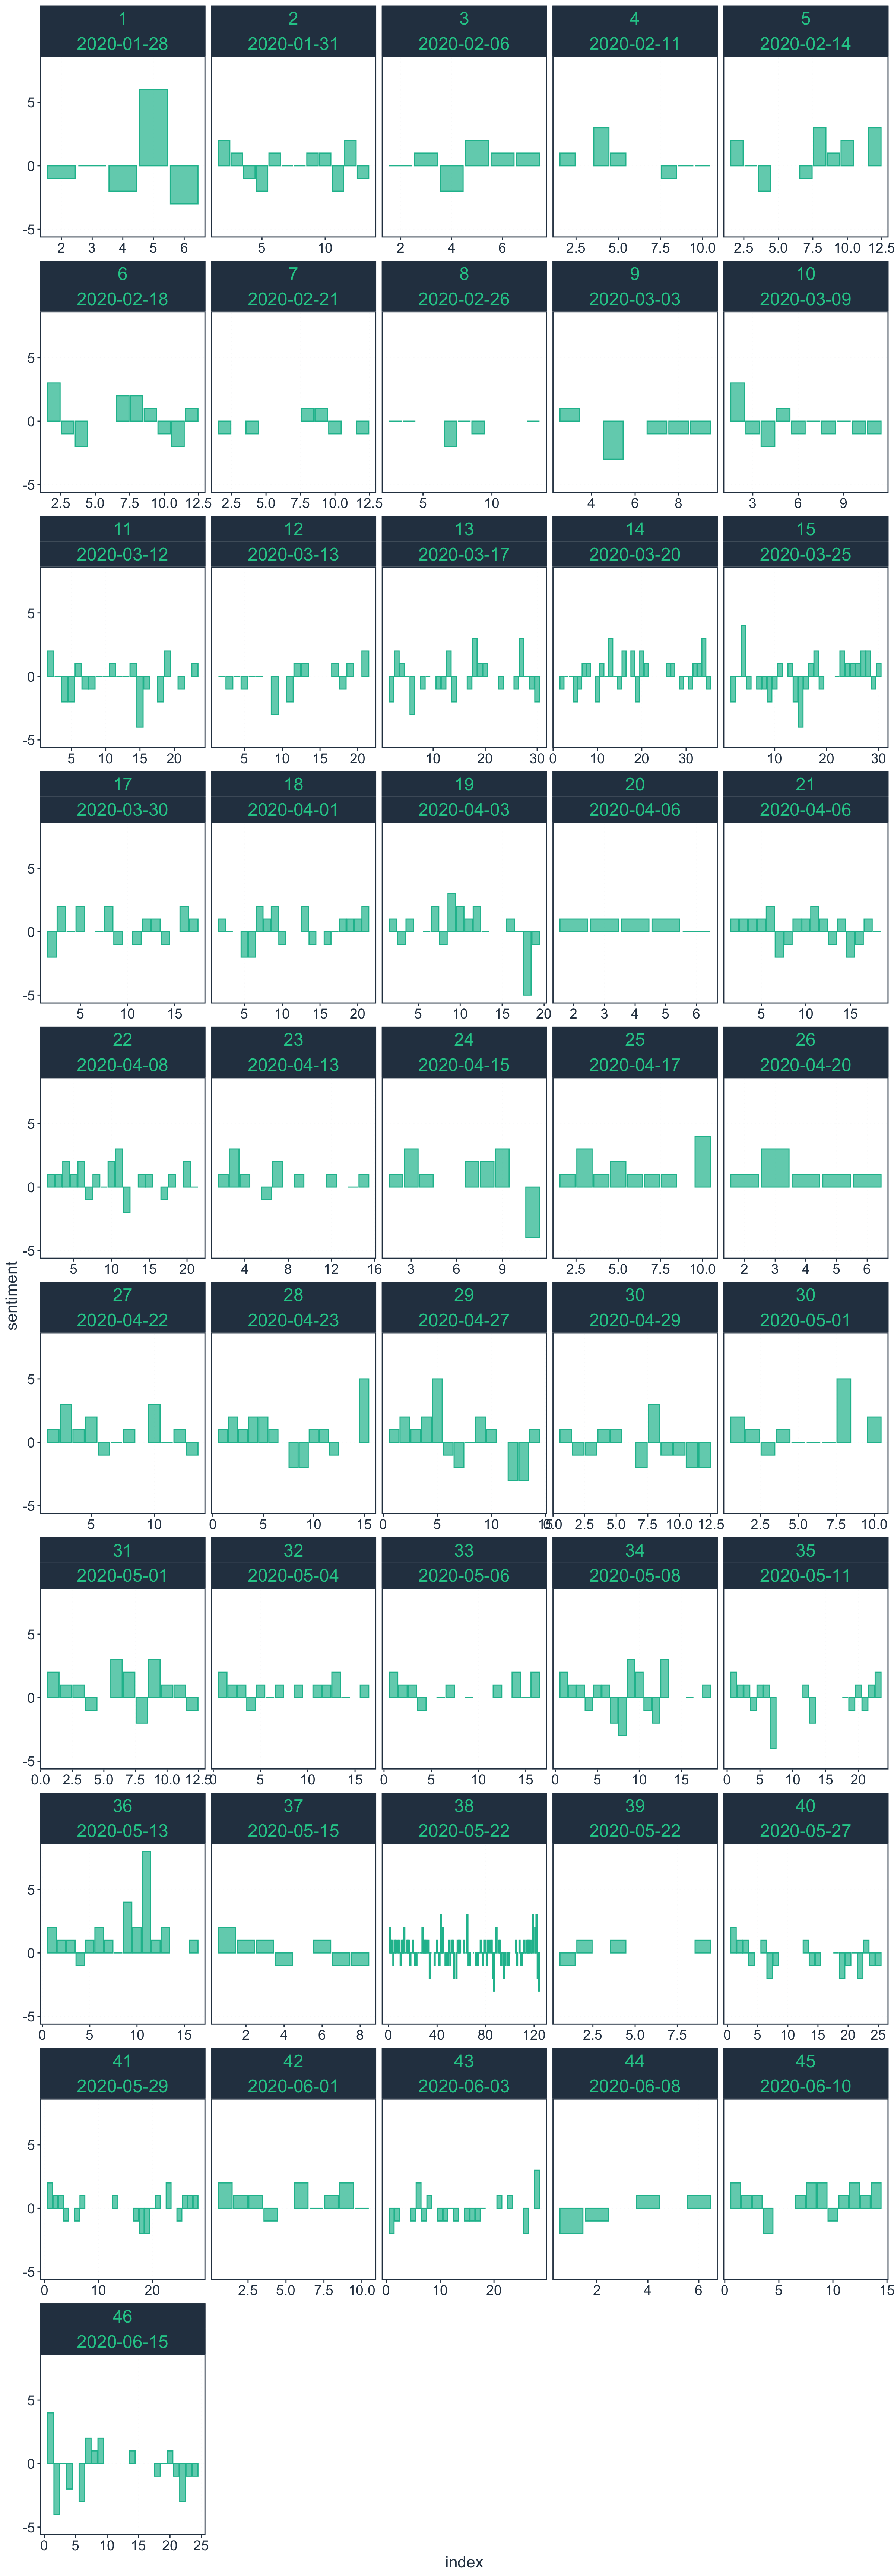 Sentiment change throughout each resolution